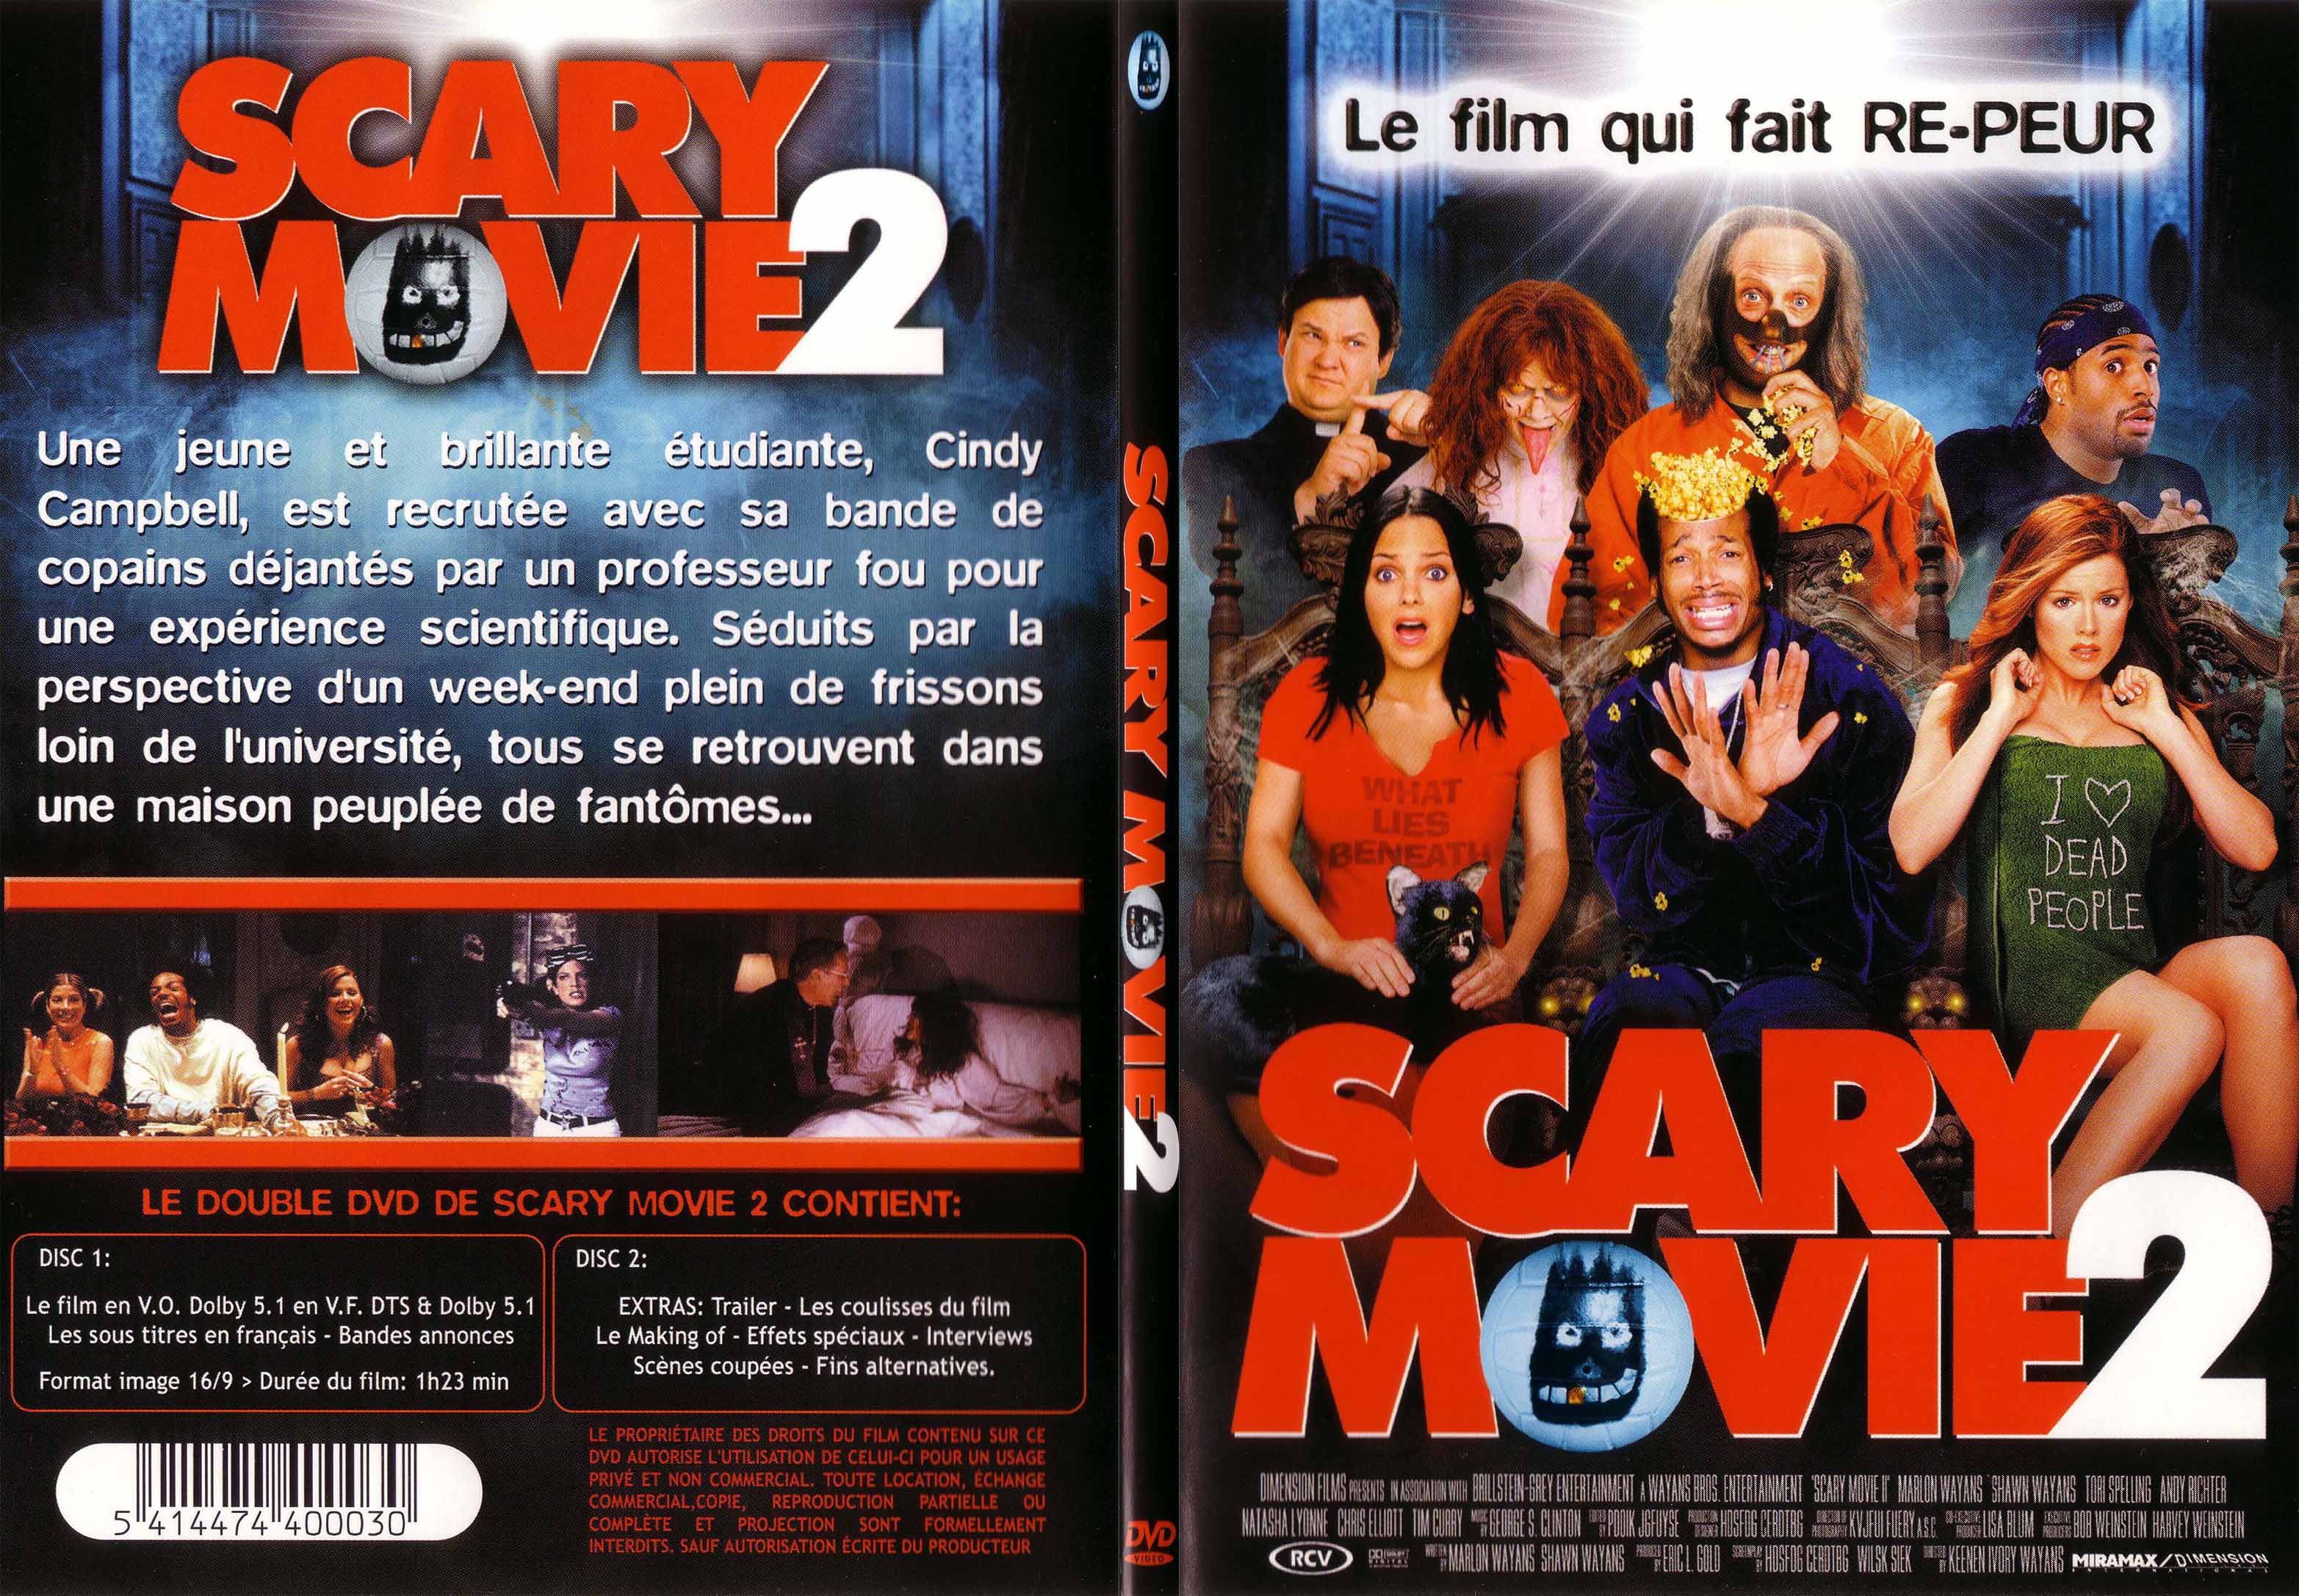 Jaquette DVD Scary Movie 2 - SLIM